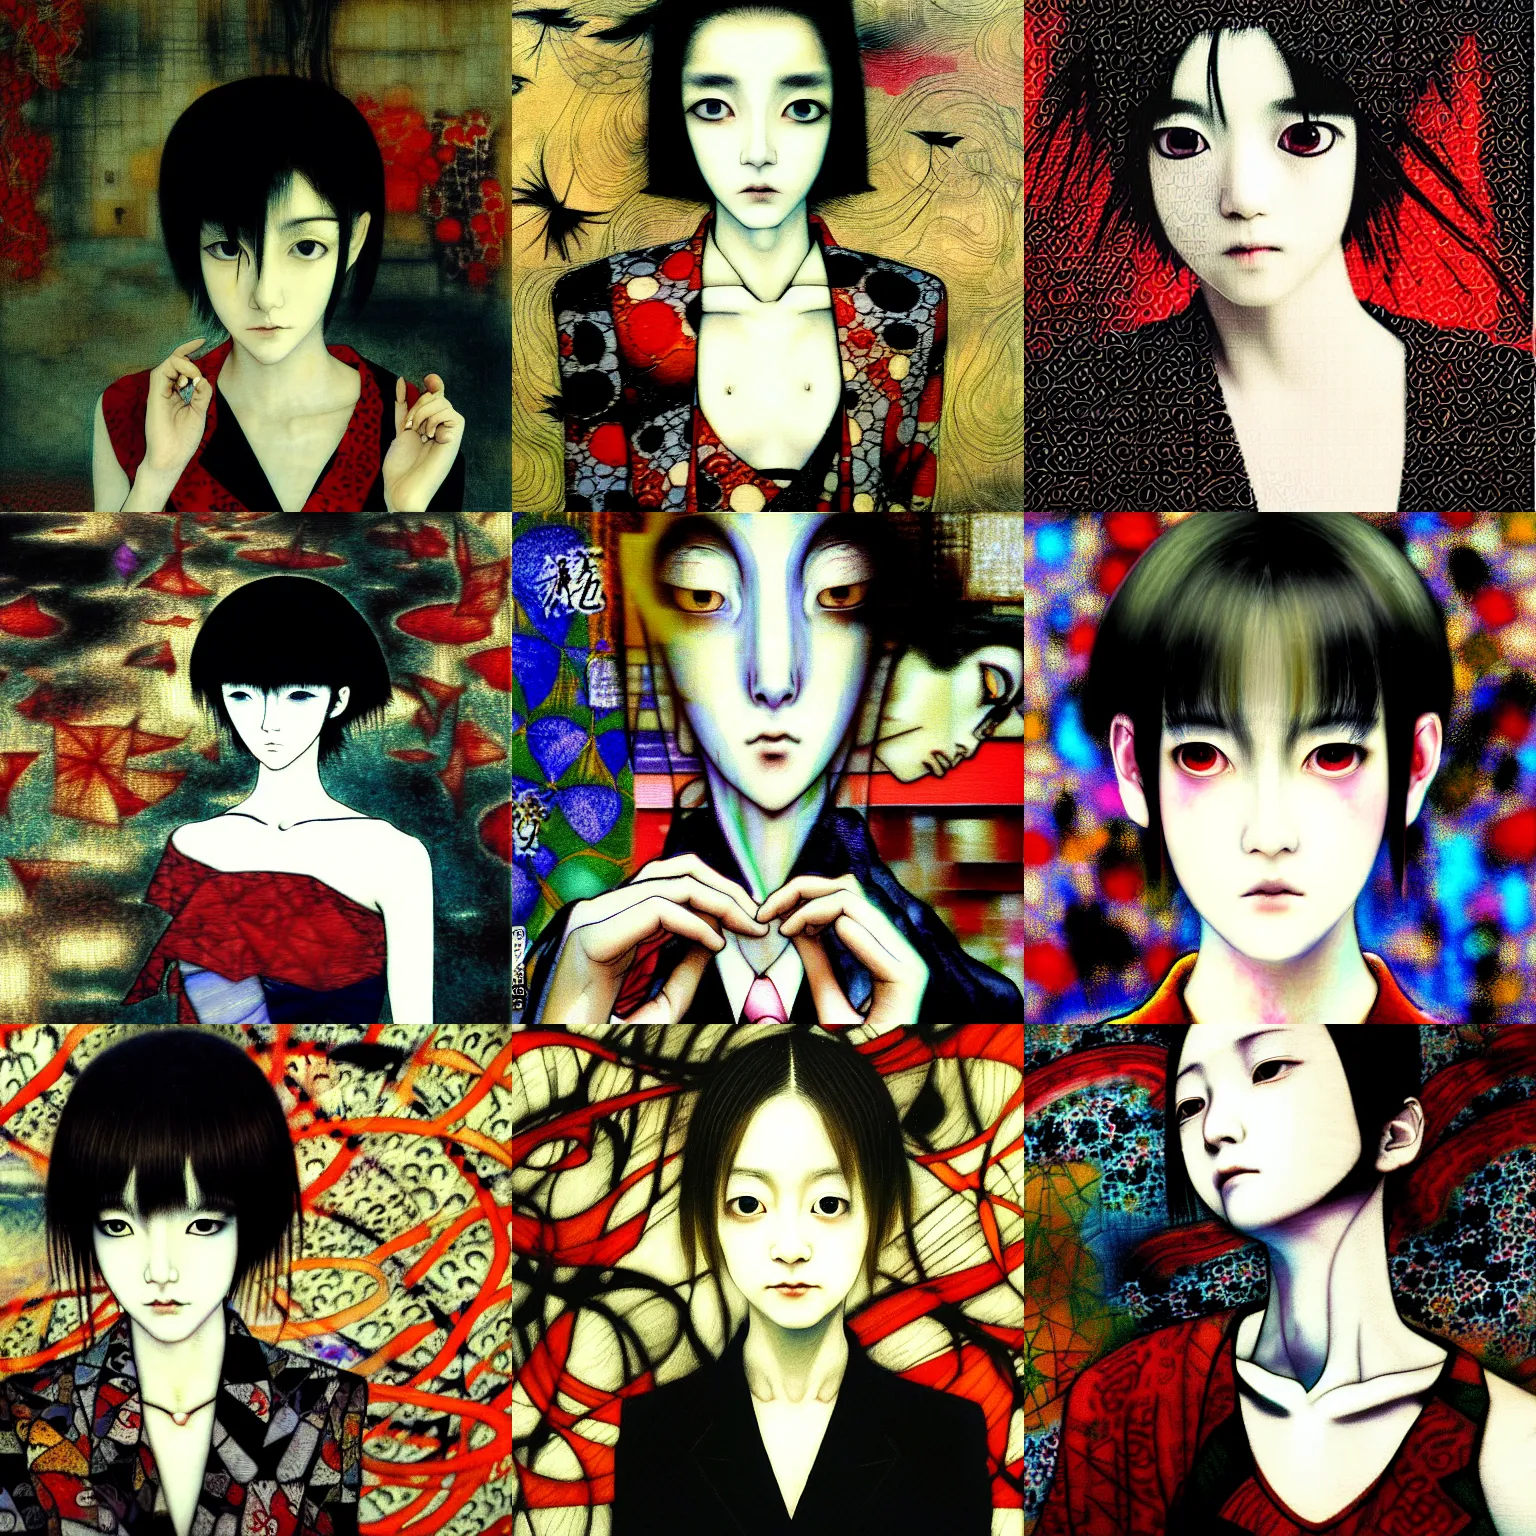 Prompt: yoshitaka amano blurred and dreamy realistic portrait of a young woman with short hair and black eyes wearing dress suit with tie, junji ito abstract patterns in the background, satoshi kon anime, noisy film grain effect, highly detailed, renaissance oil painting, weird camera angle, blurred lost edges